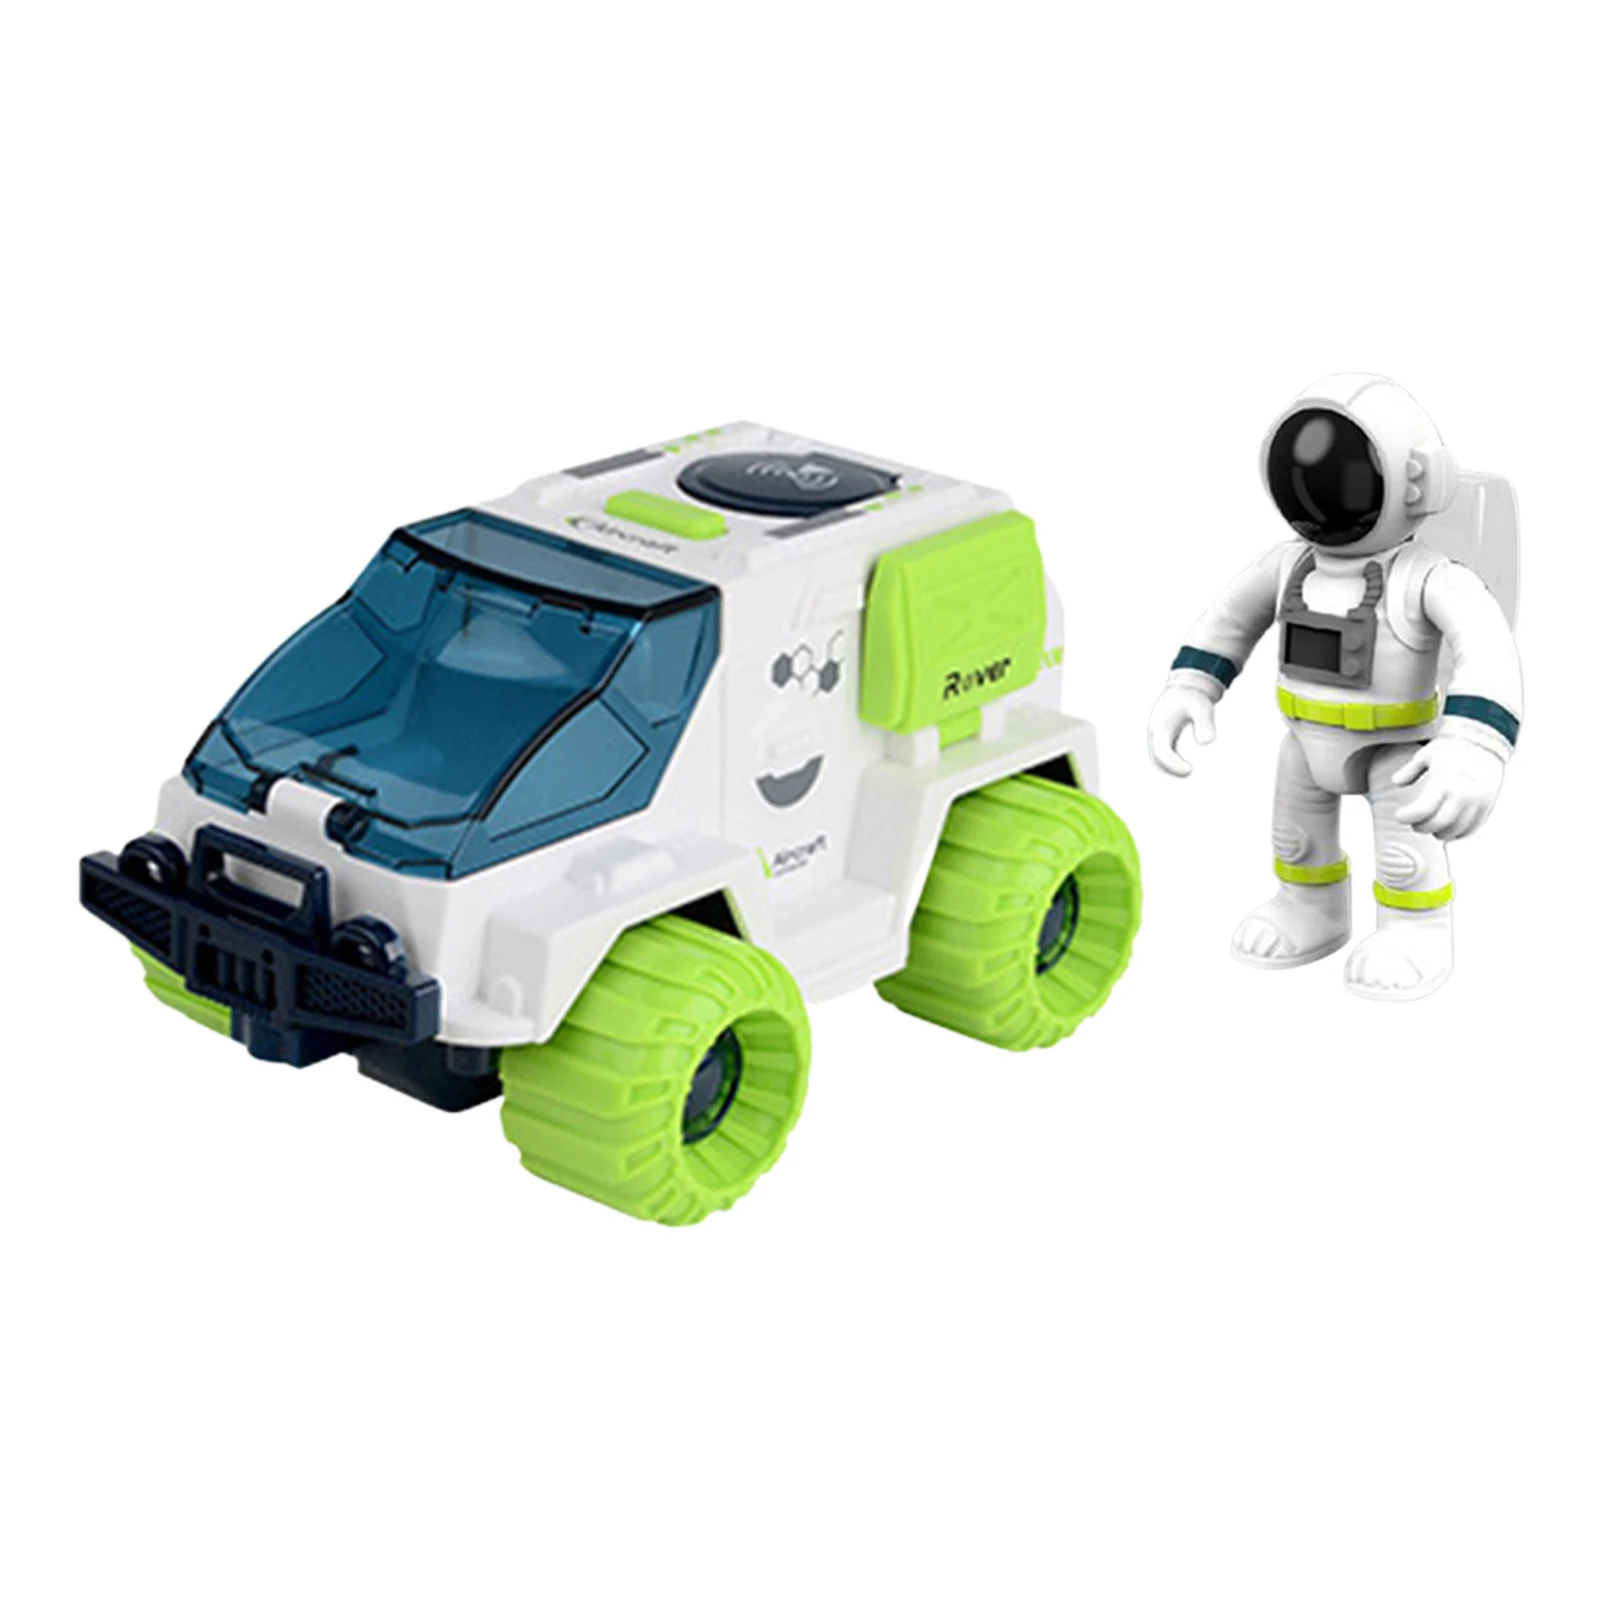 Space Toys With Space Ship Space Rover With Astronaut Figure Space Toys For Kids Over 3 Fun Venture Space Shuttle For Boys And G abstr space